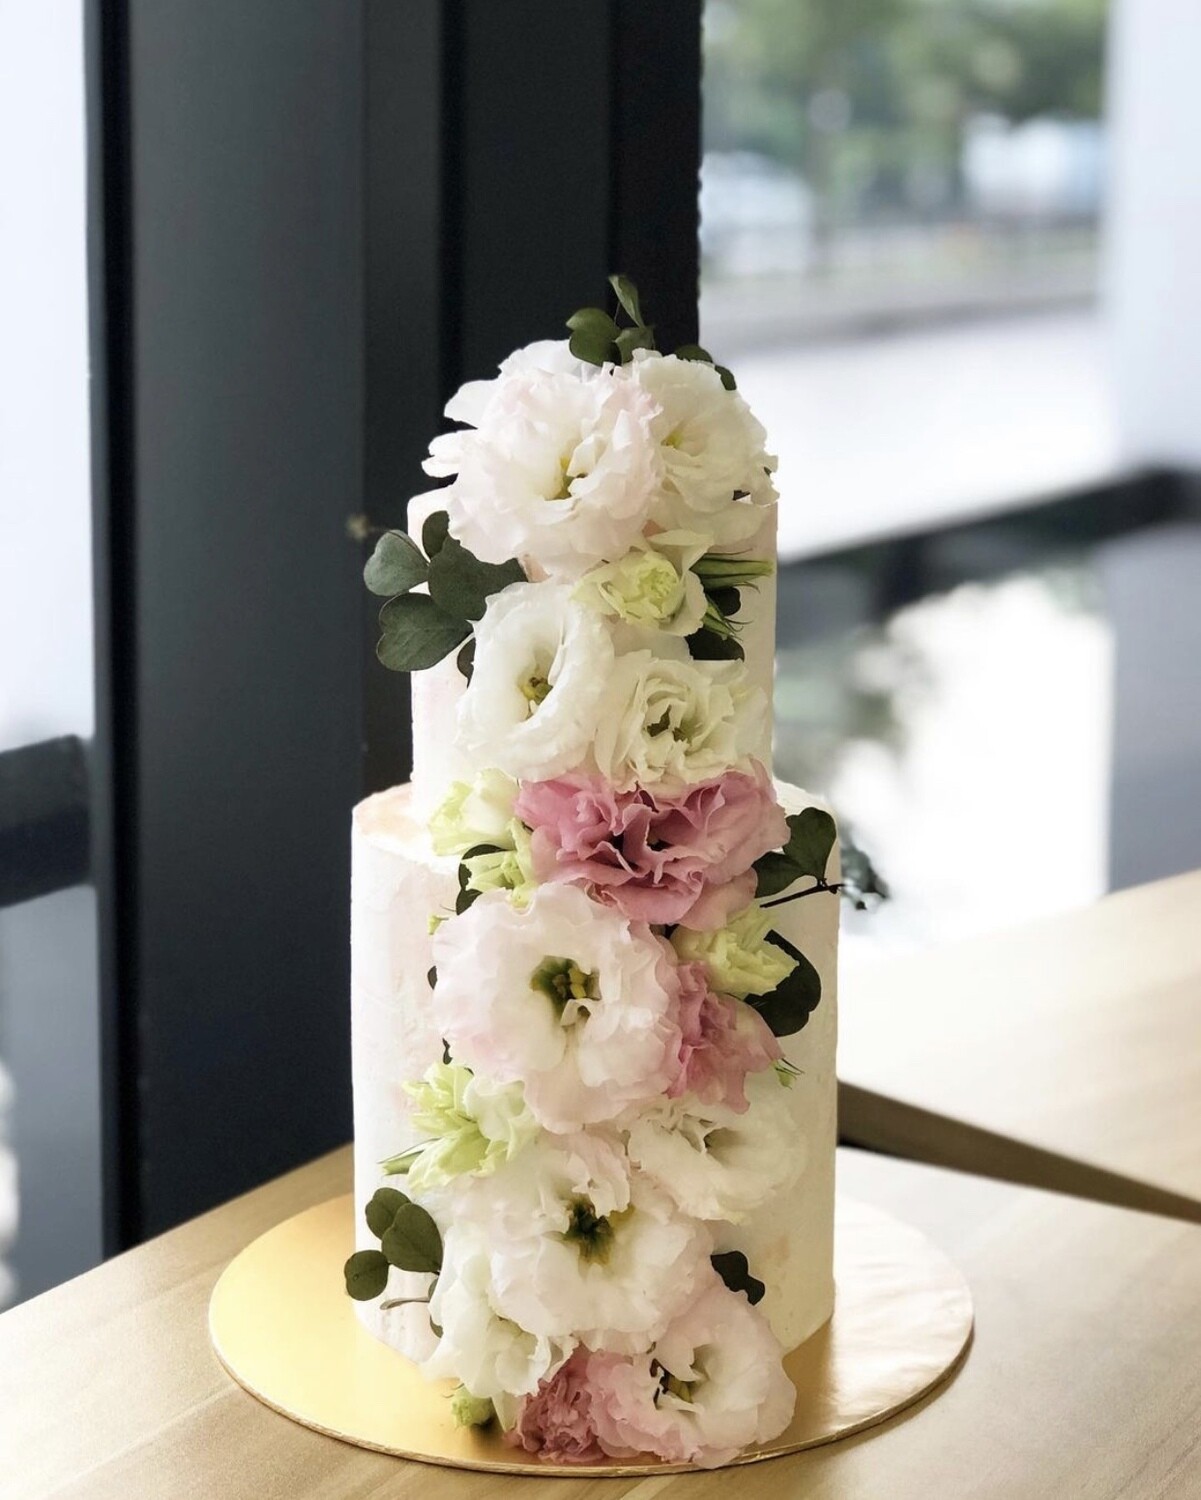 Eustoma Flow in 2 Or 3 Tiers Cake